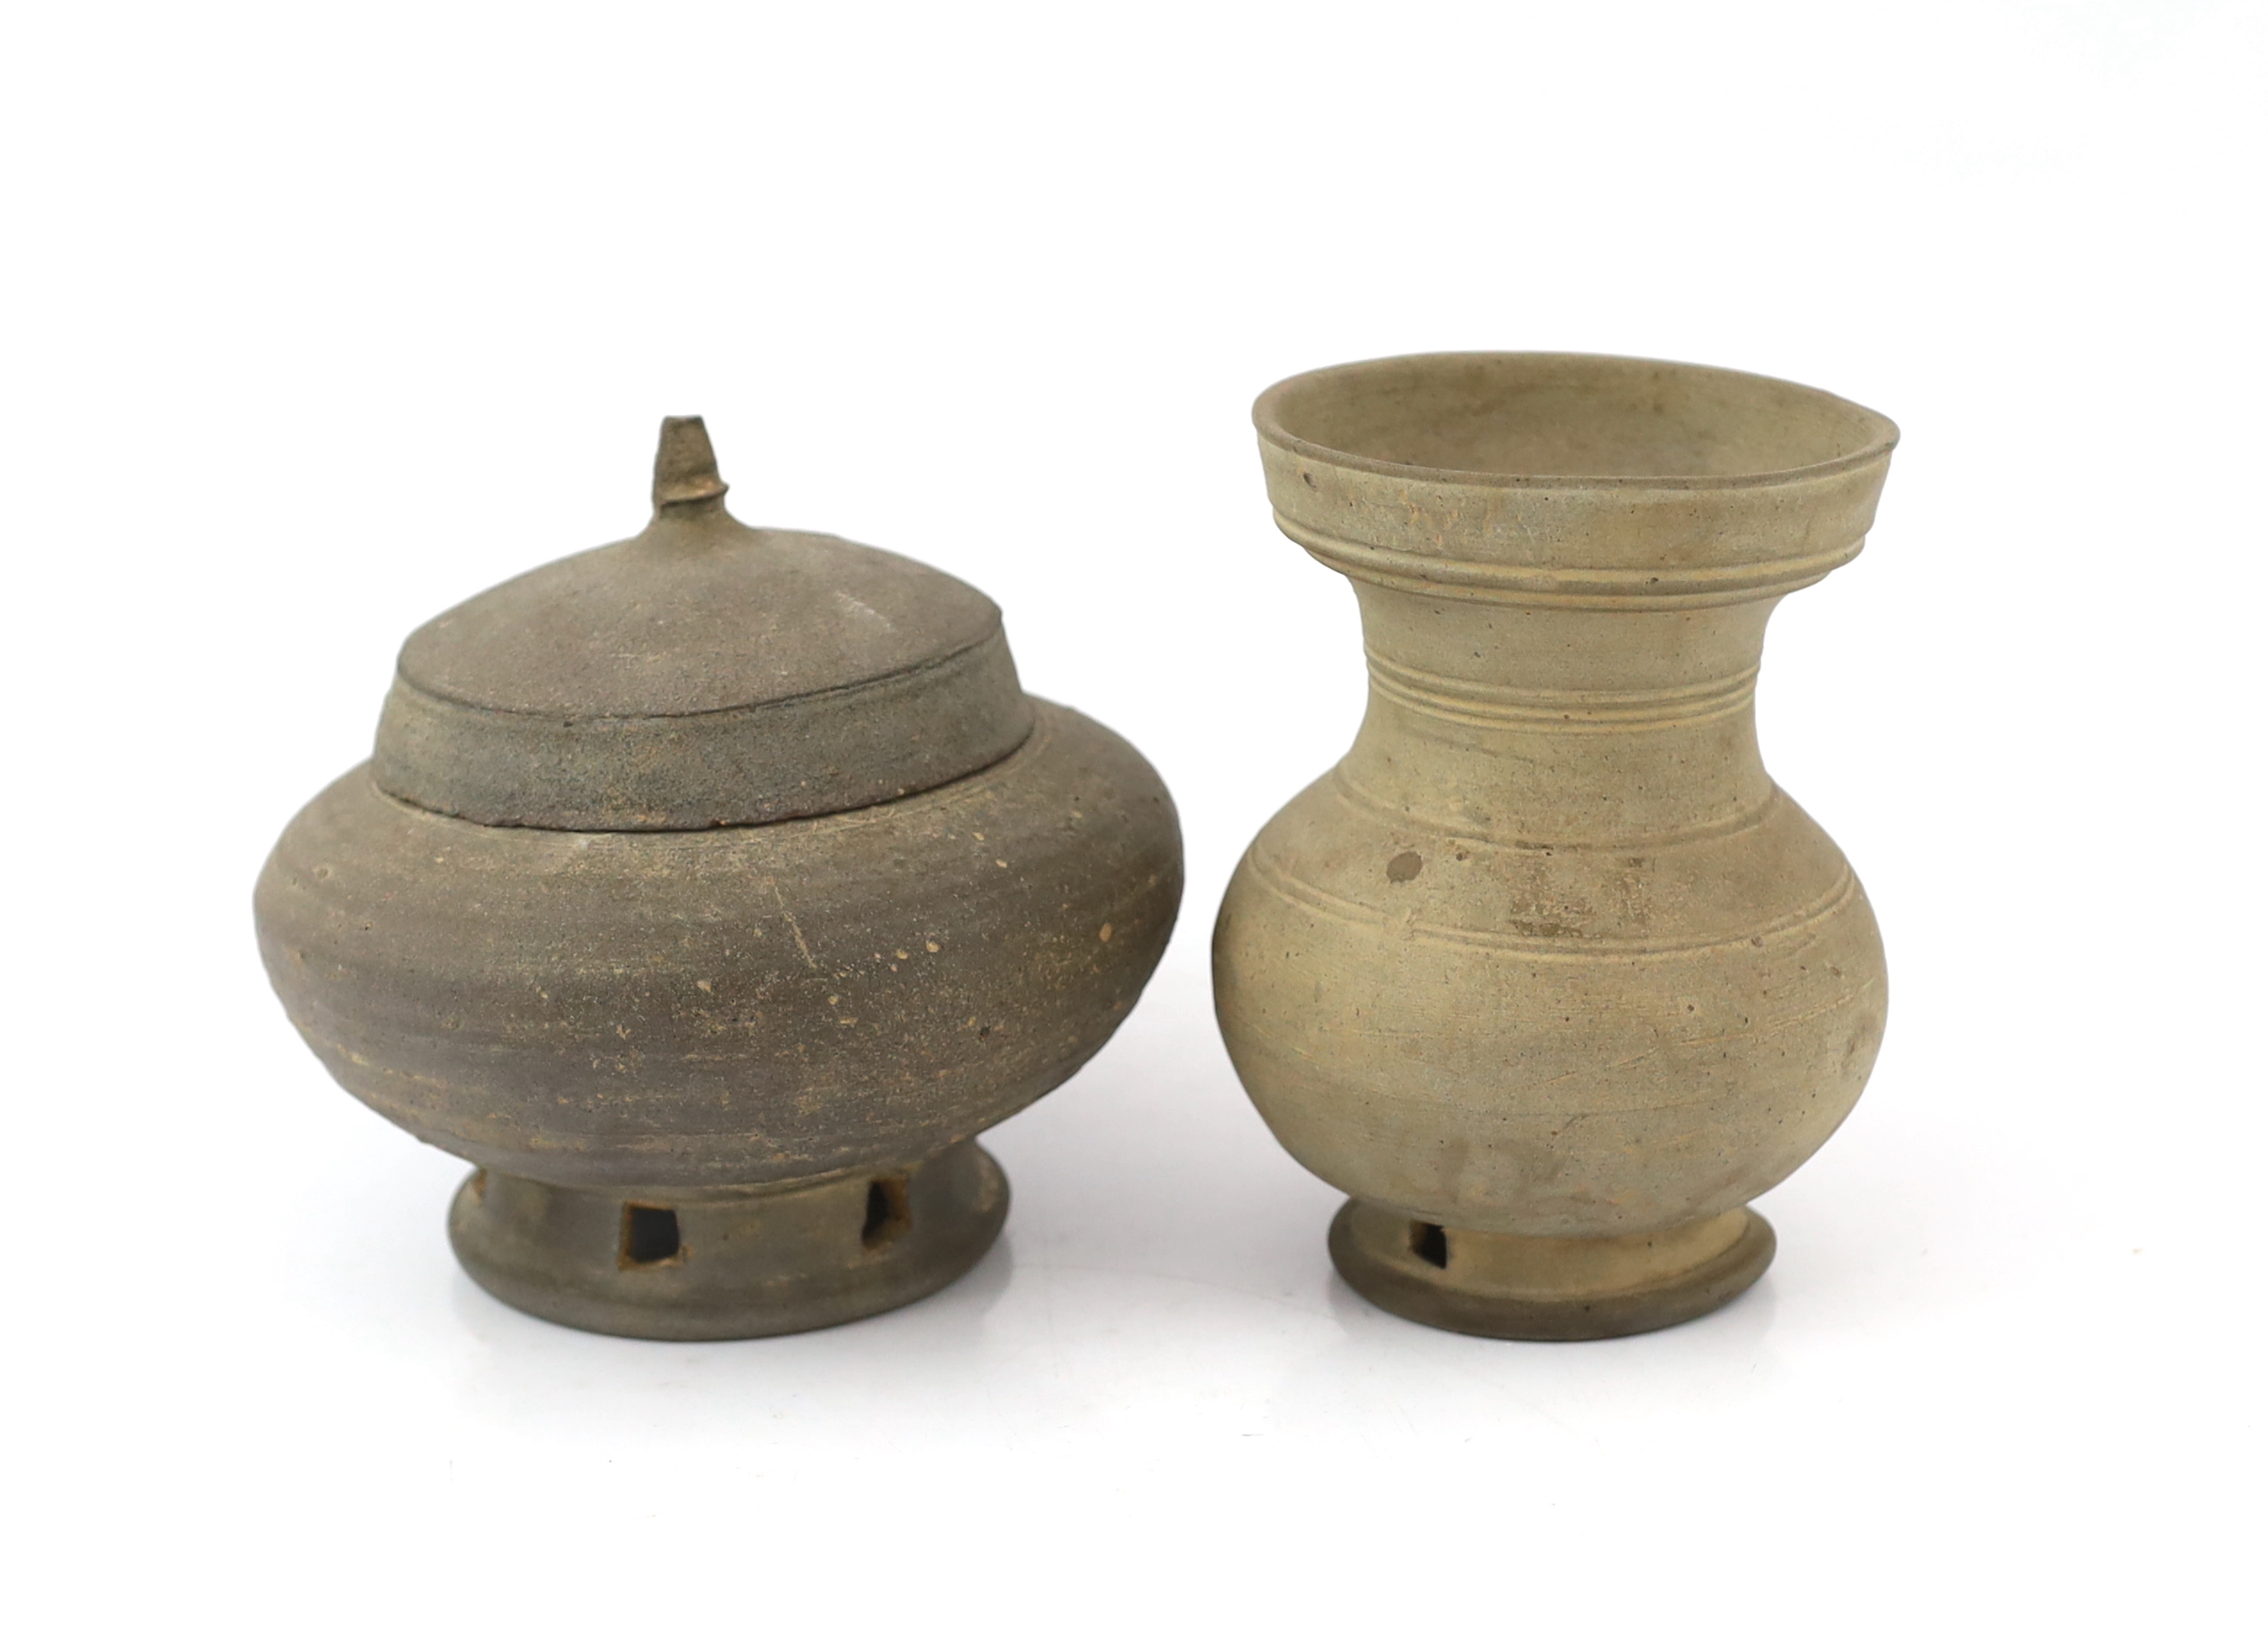 Two Chinese stoneware vessels, Han dynasty (202BC - 220 AD)